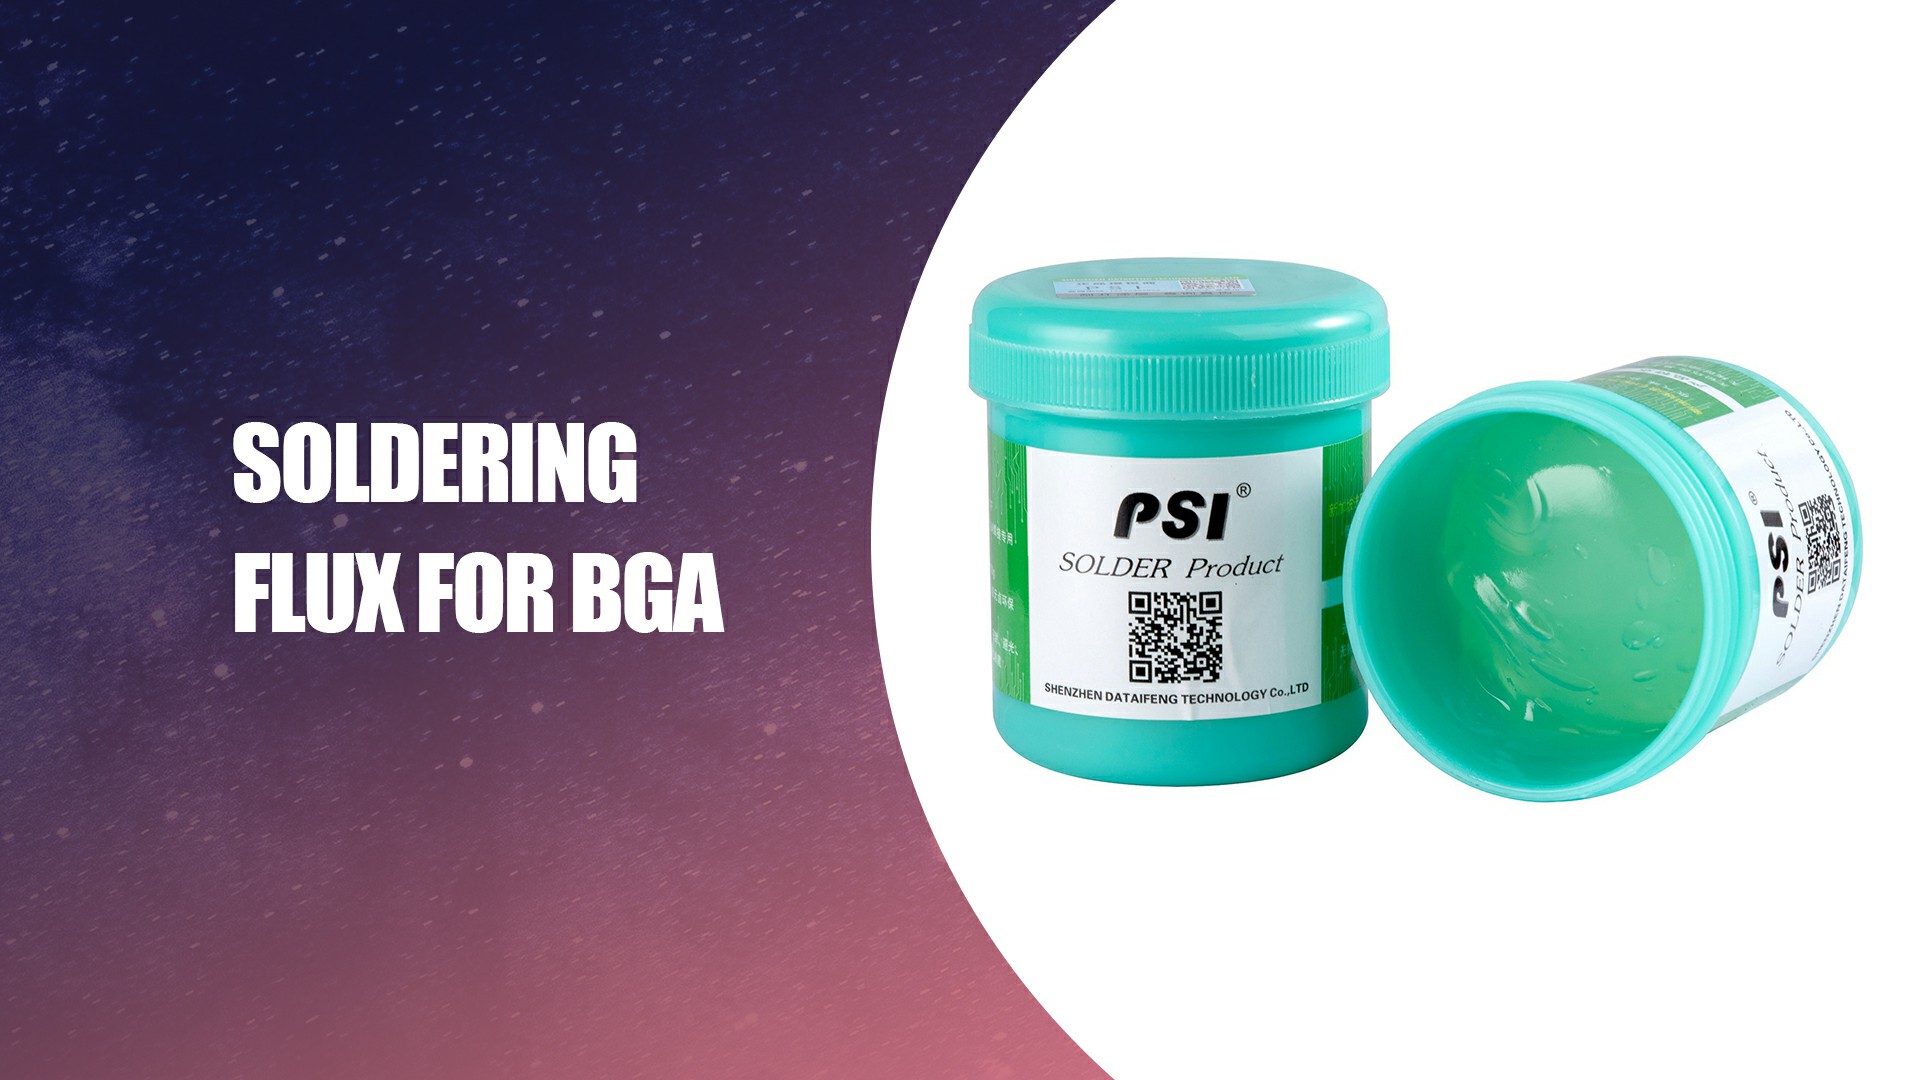 Intro to Soldering Flux for BGA Dataifeng